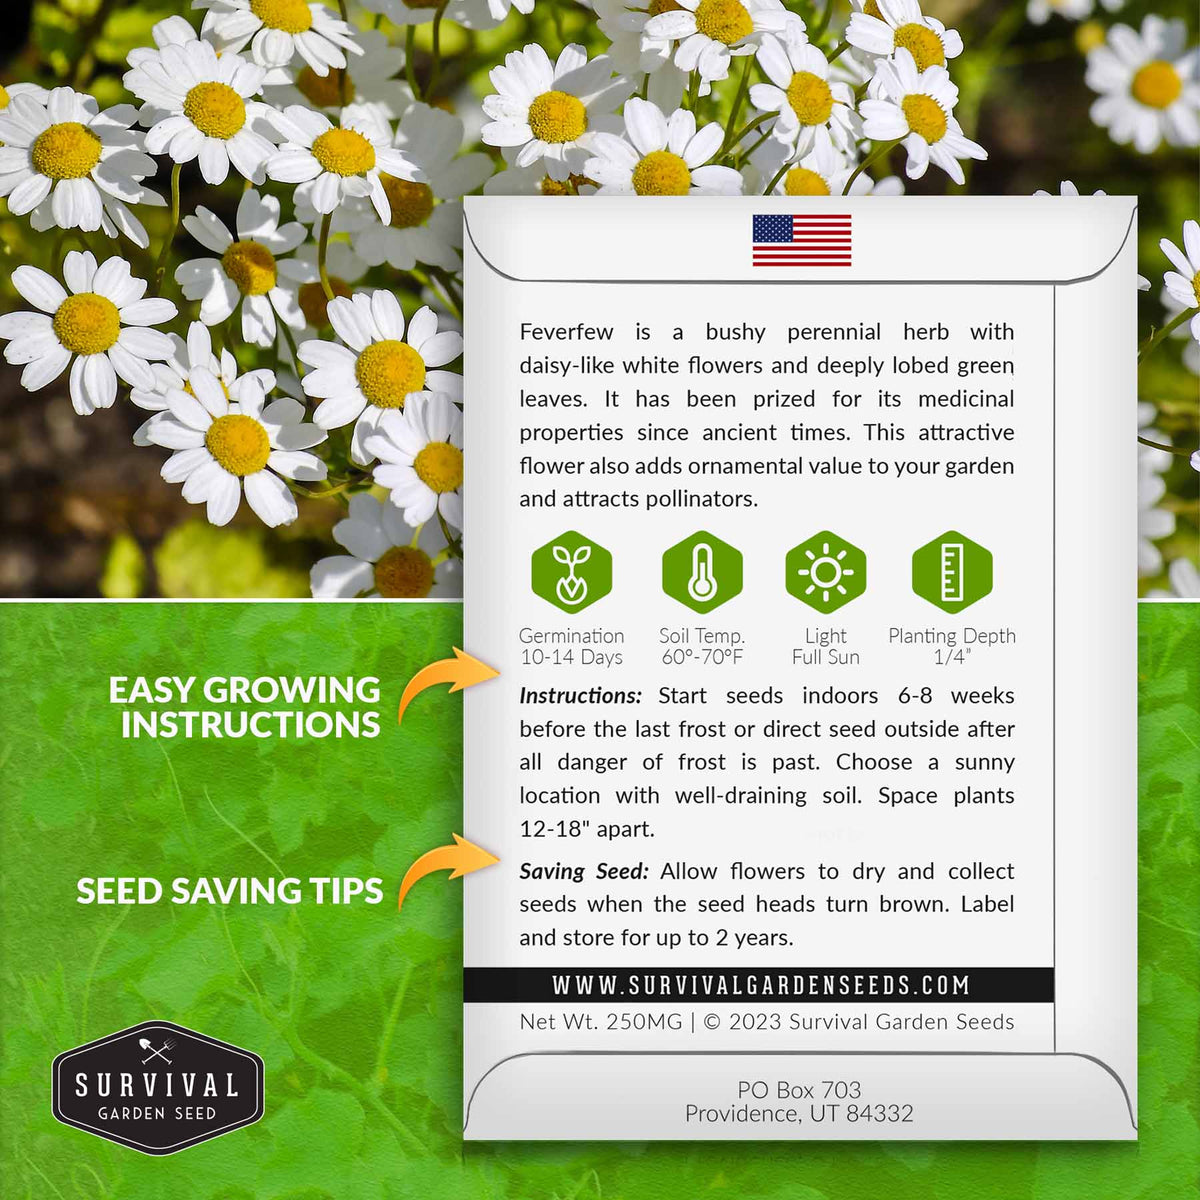 Feverfew seed growing instructions